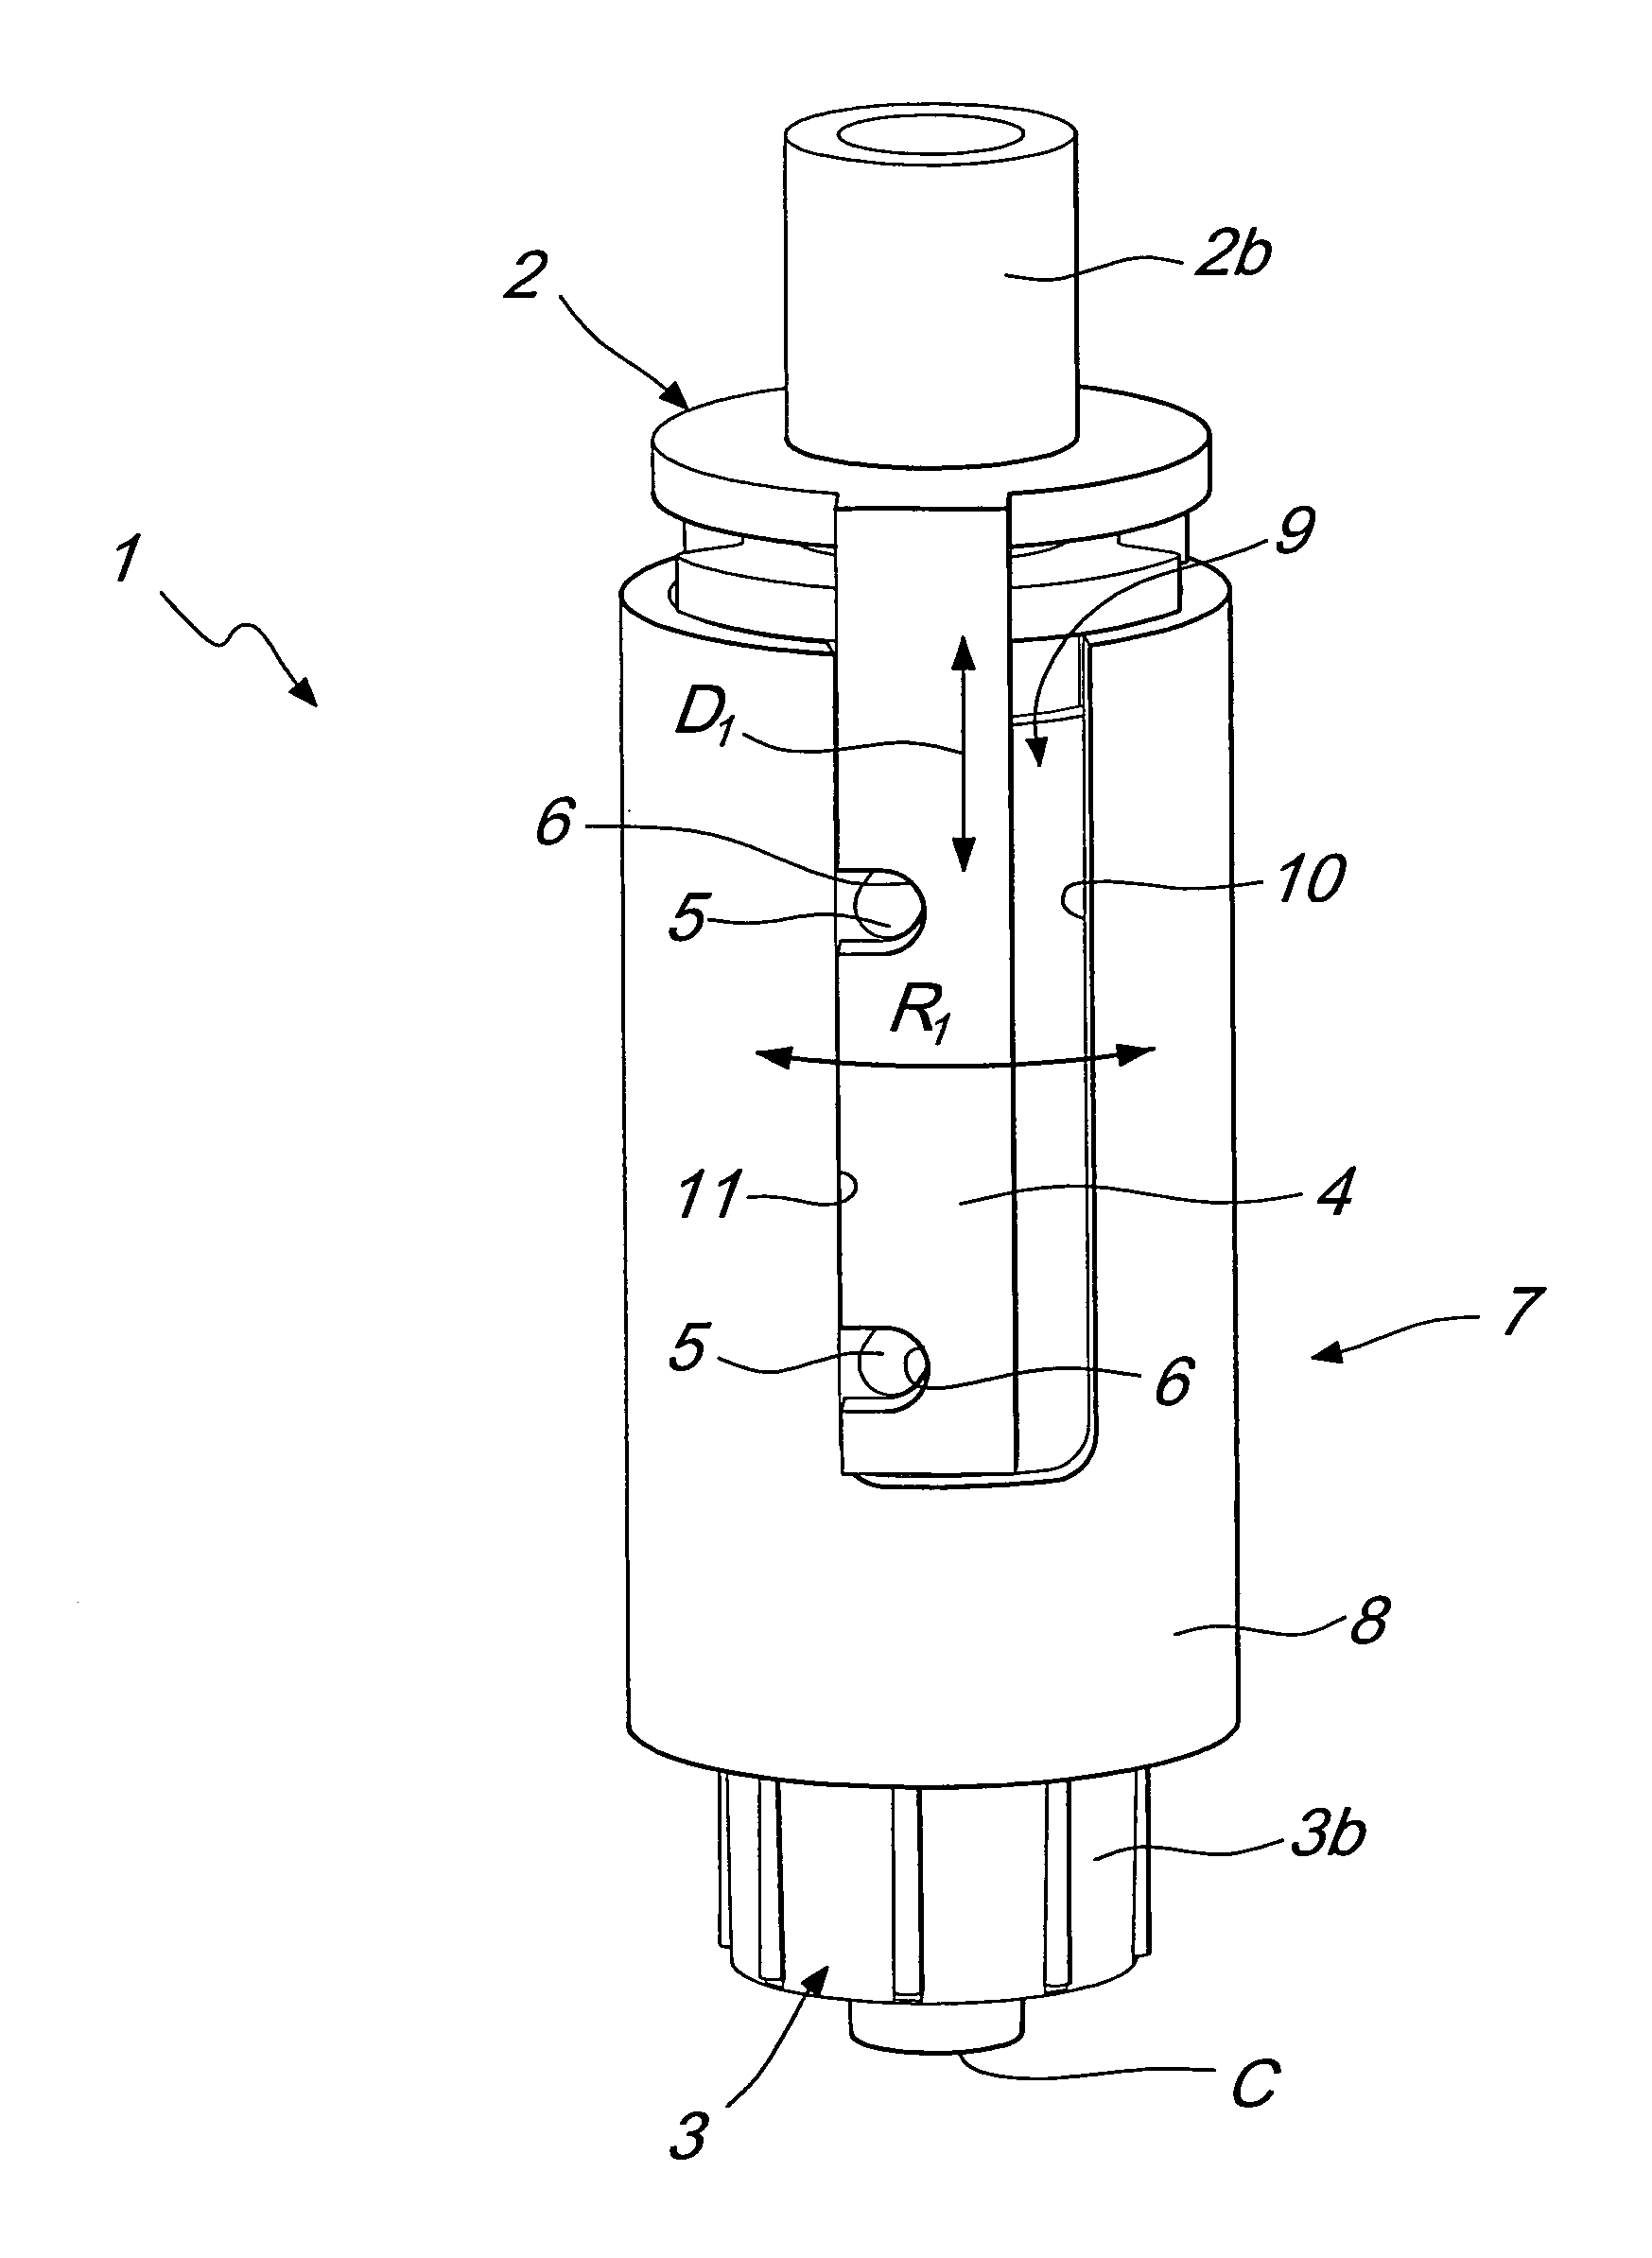 Closure device for lines for administering medical or pharmaceutical fluids from containers or the like